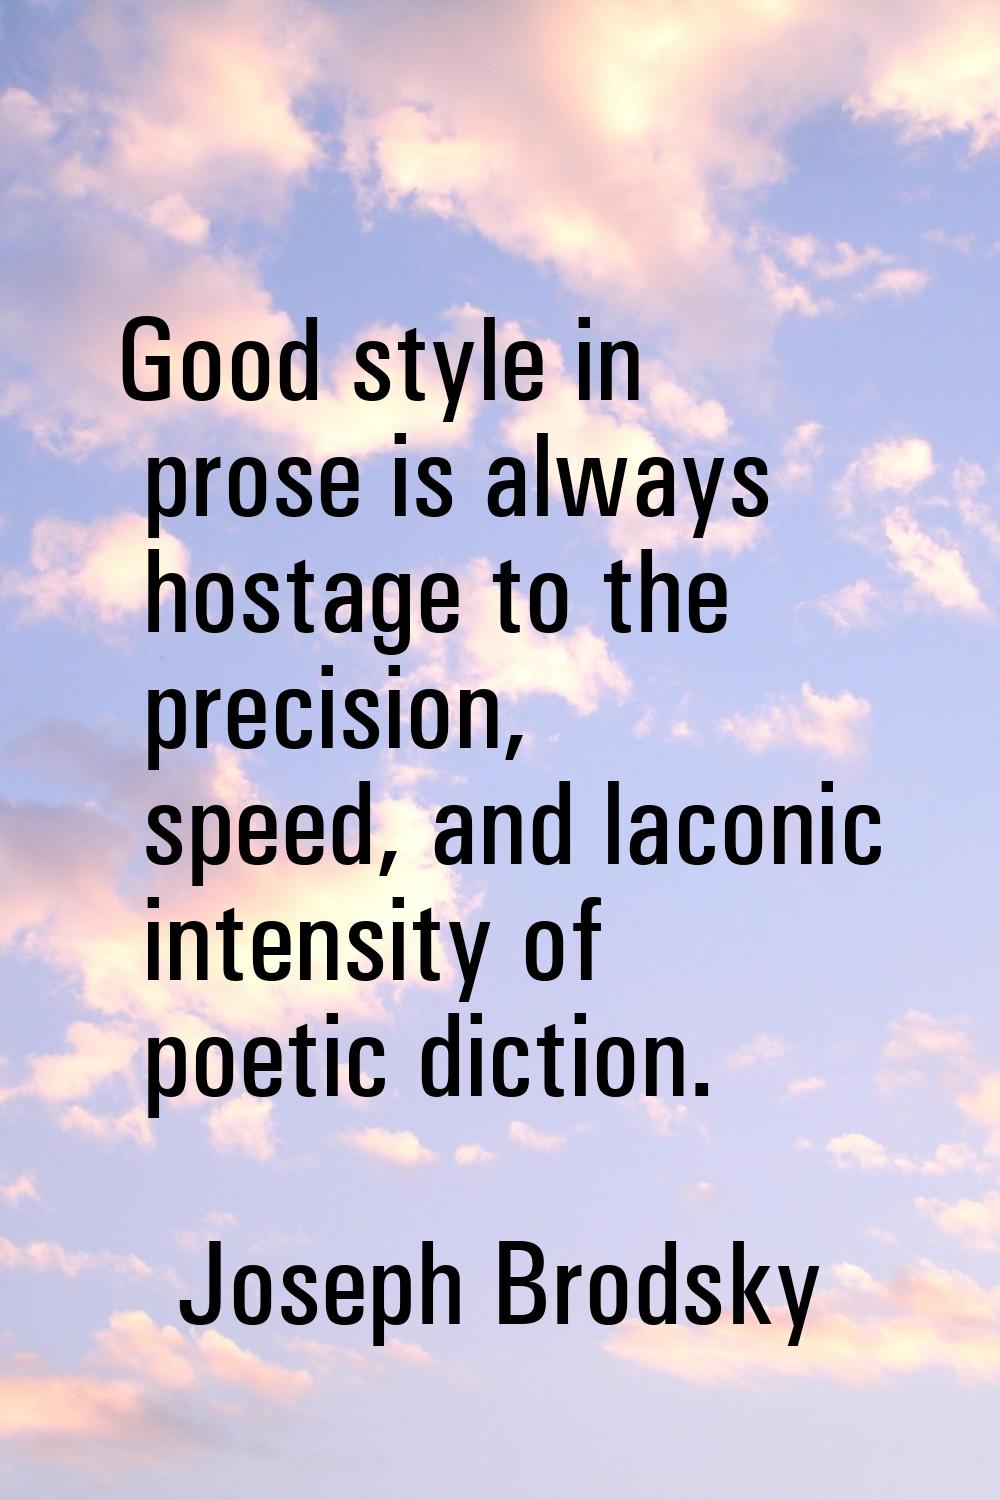 Good style in prose is always hostage to the precision, speed, and laconic intensity of poetic dict